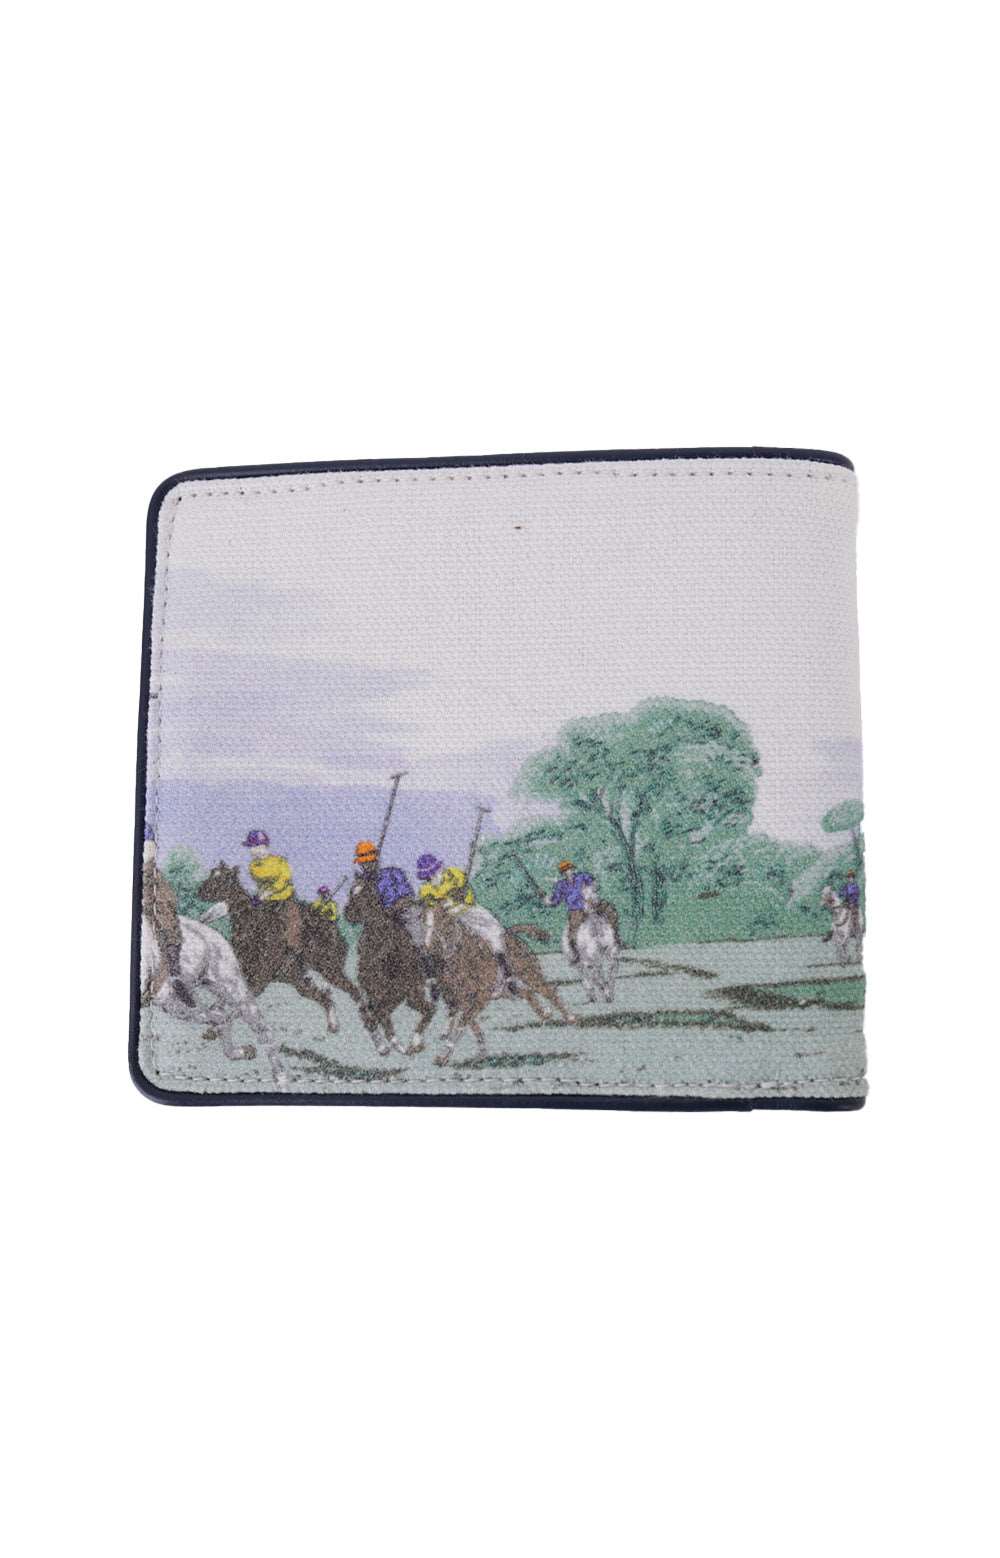 Billfold Printed Leather Wallet - Polo Match Scene